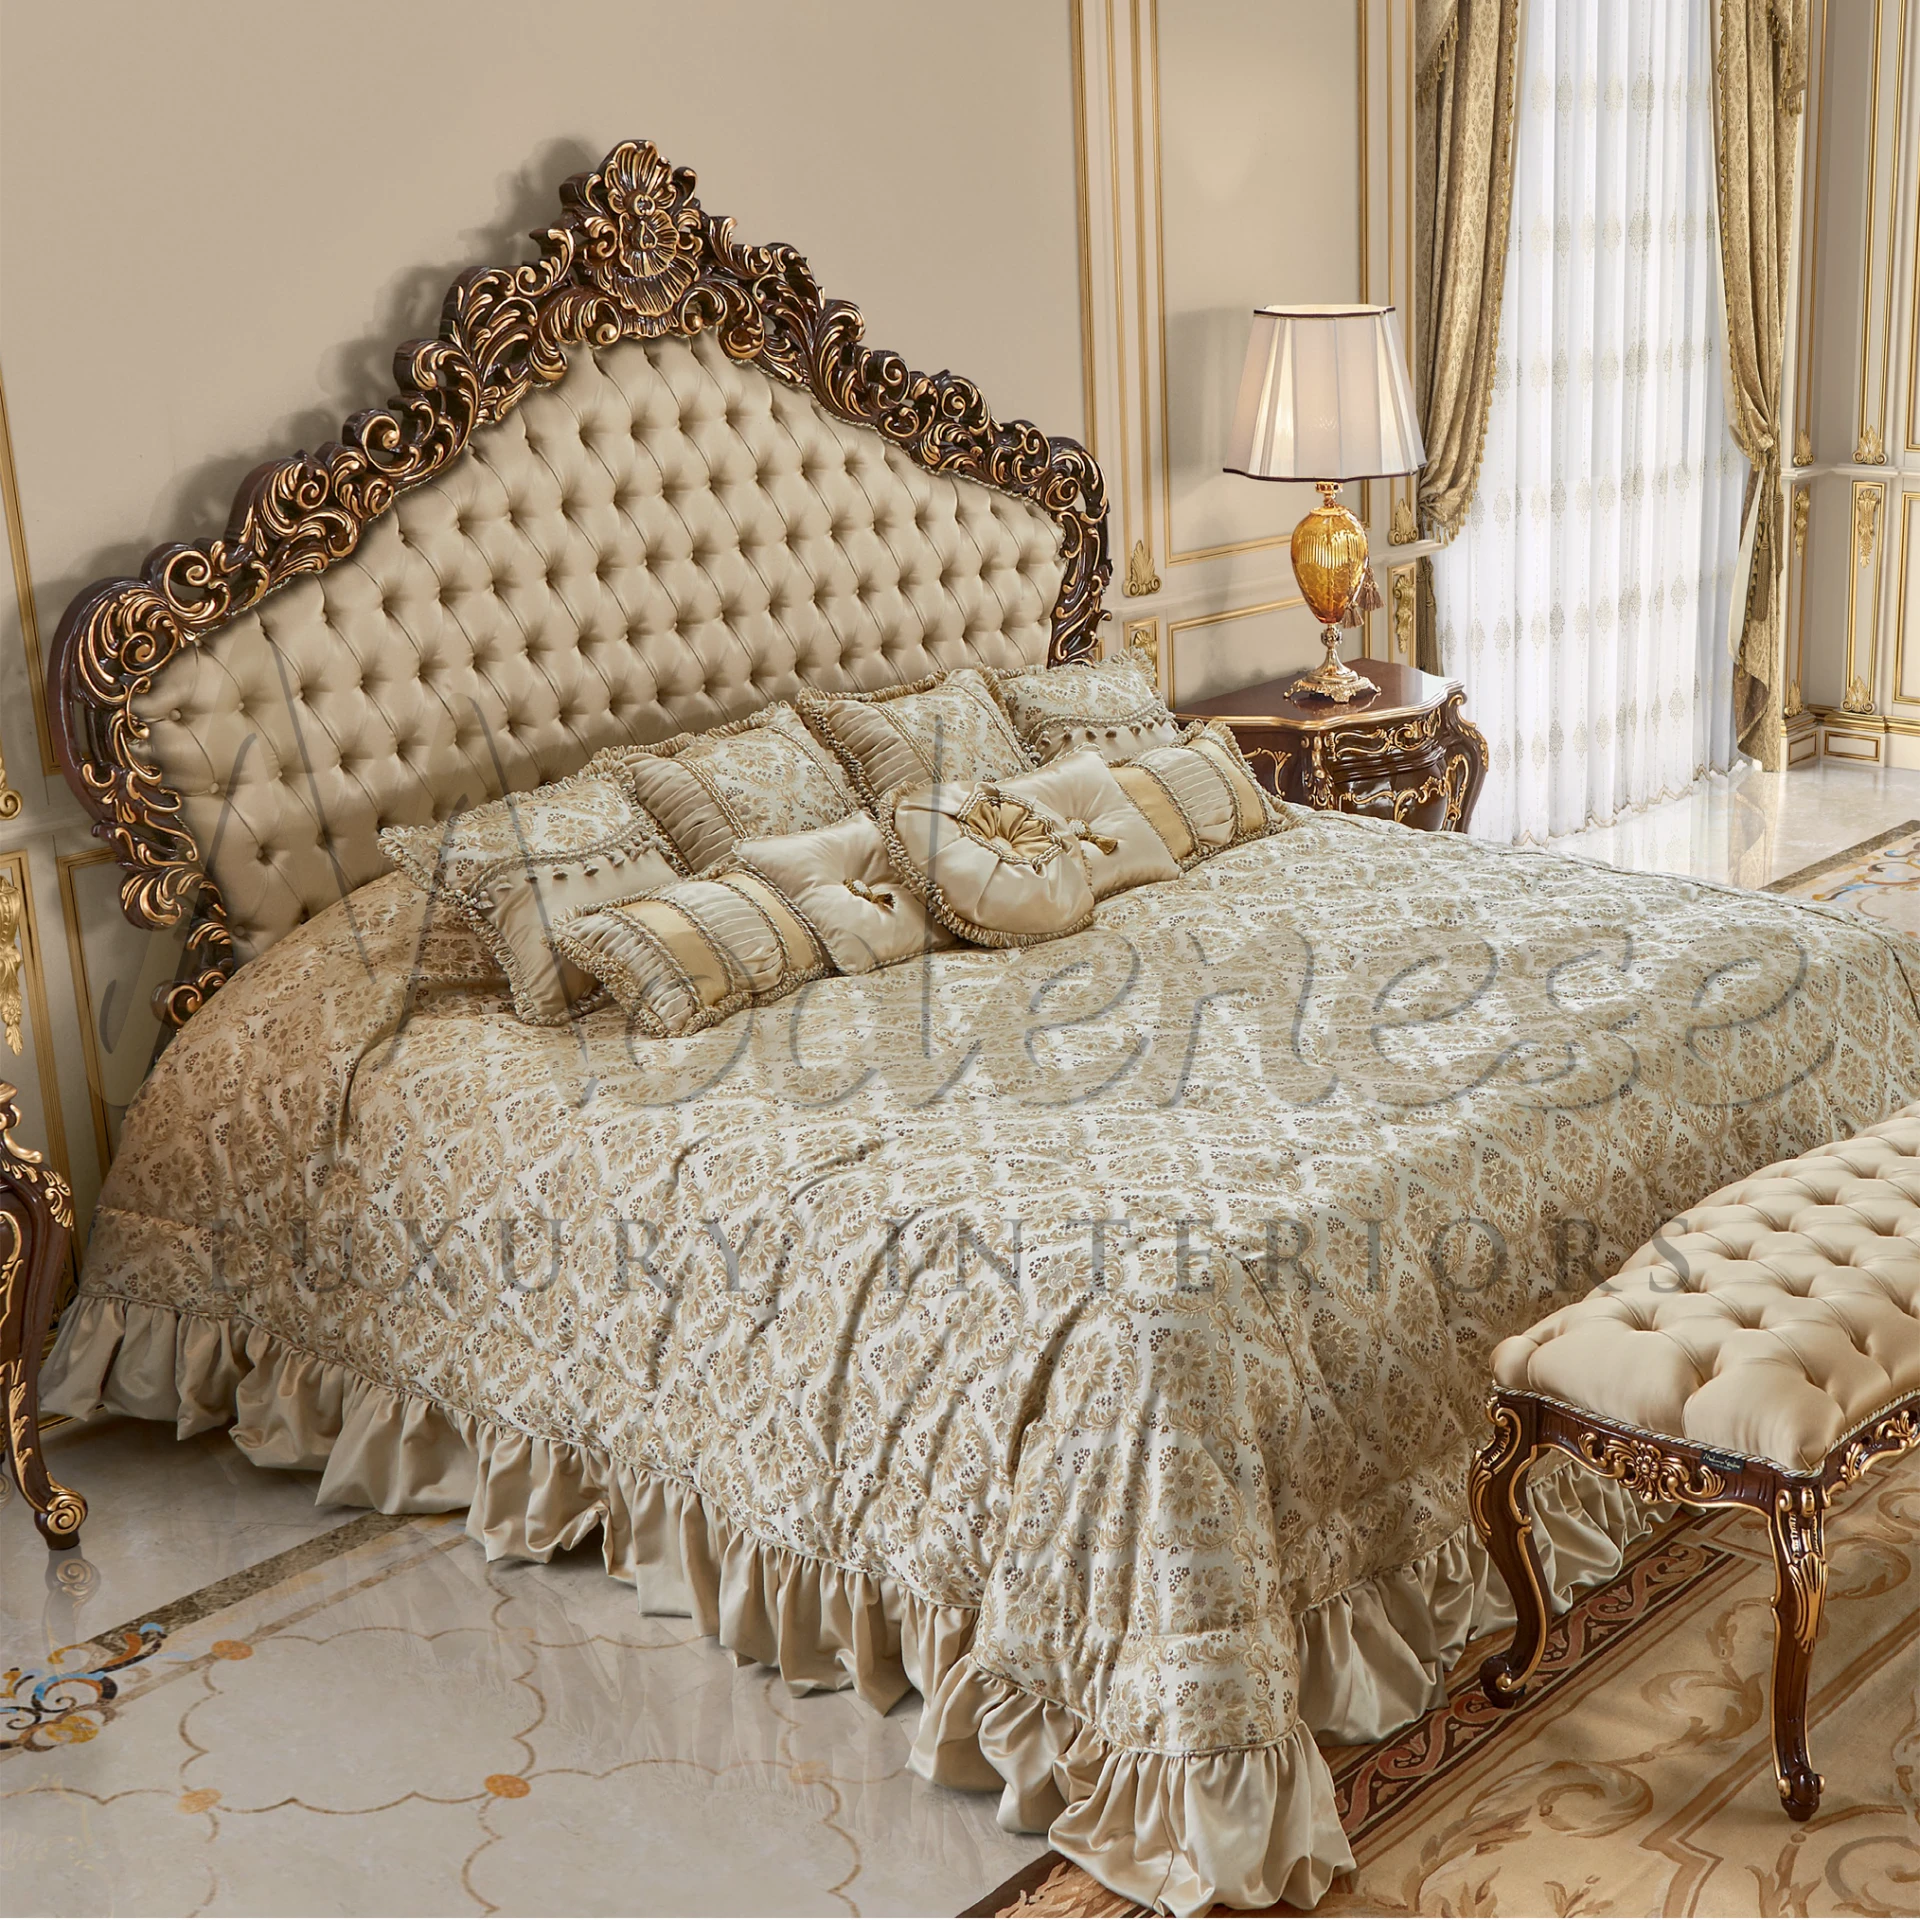 Elegant and comforting Classical Beige Pillow by Modenese, perfect for creating a space of classical style and tranquility.